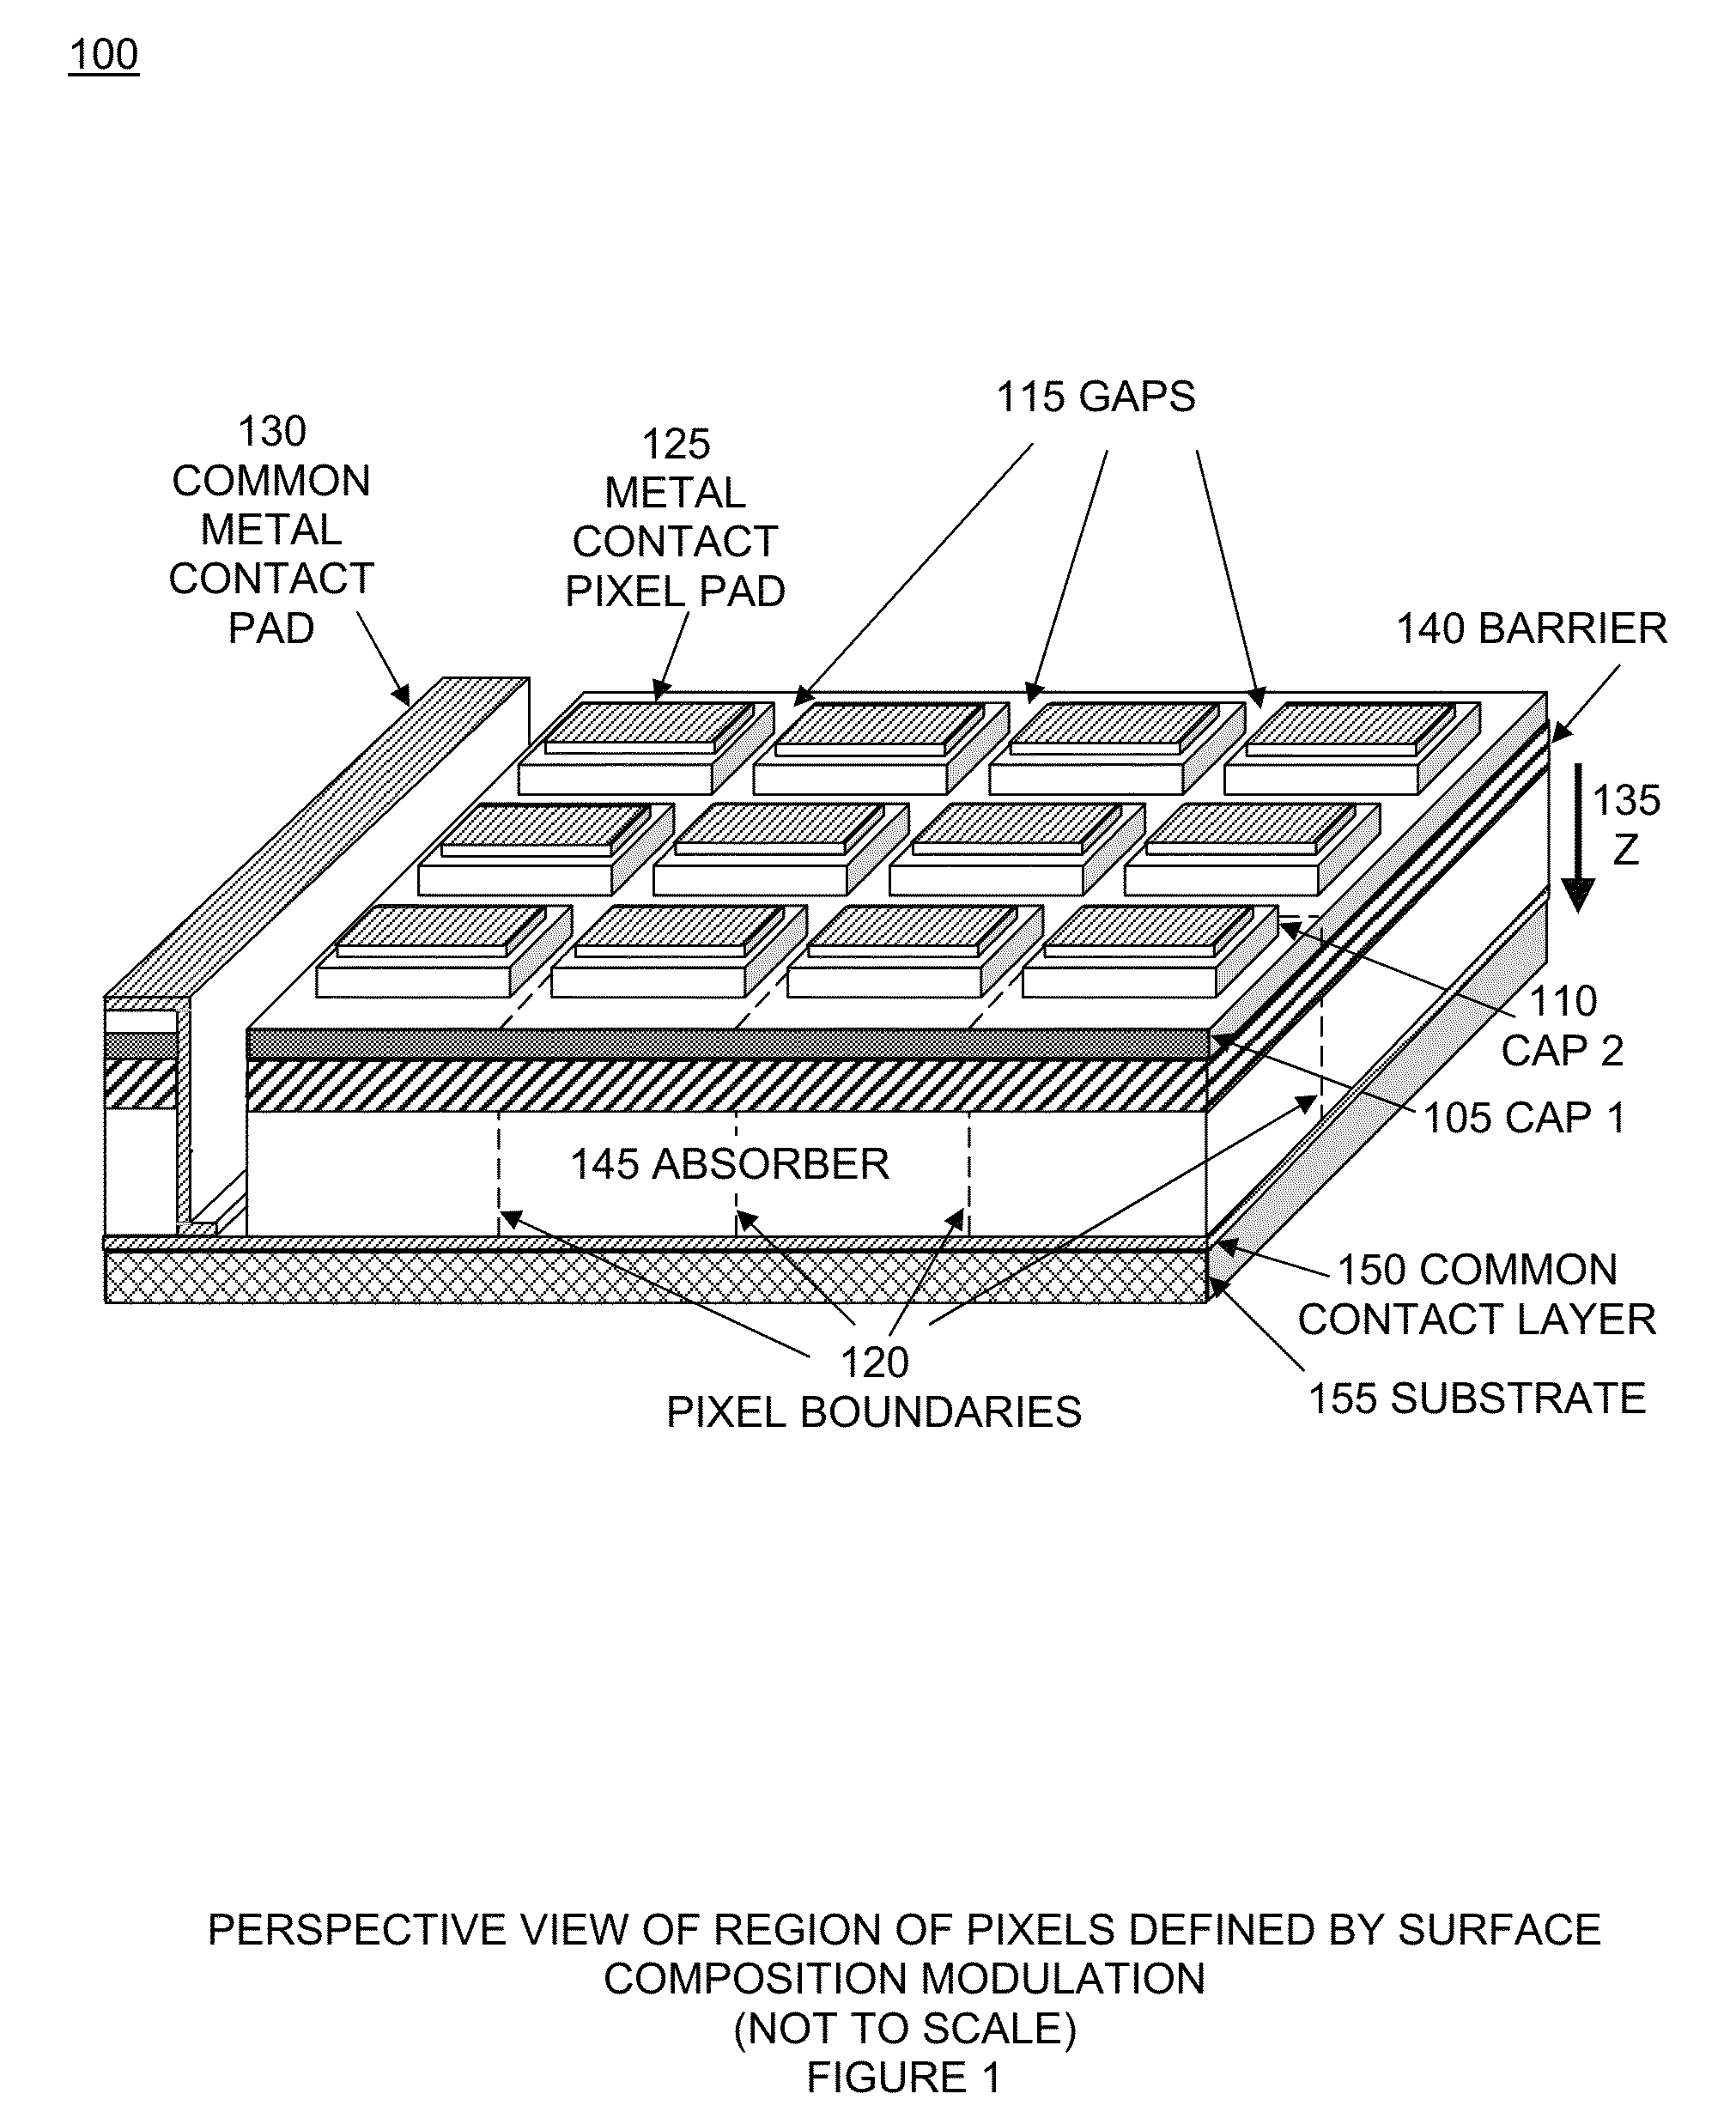 Focal plane array with pixels defined by modulation of surface Fermi energy